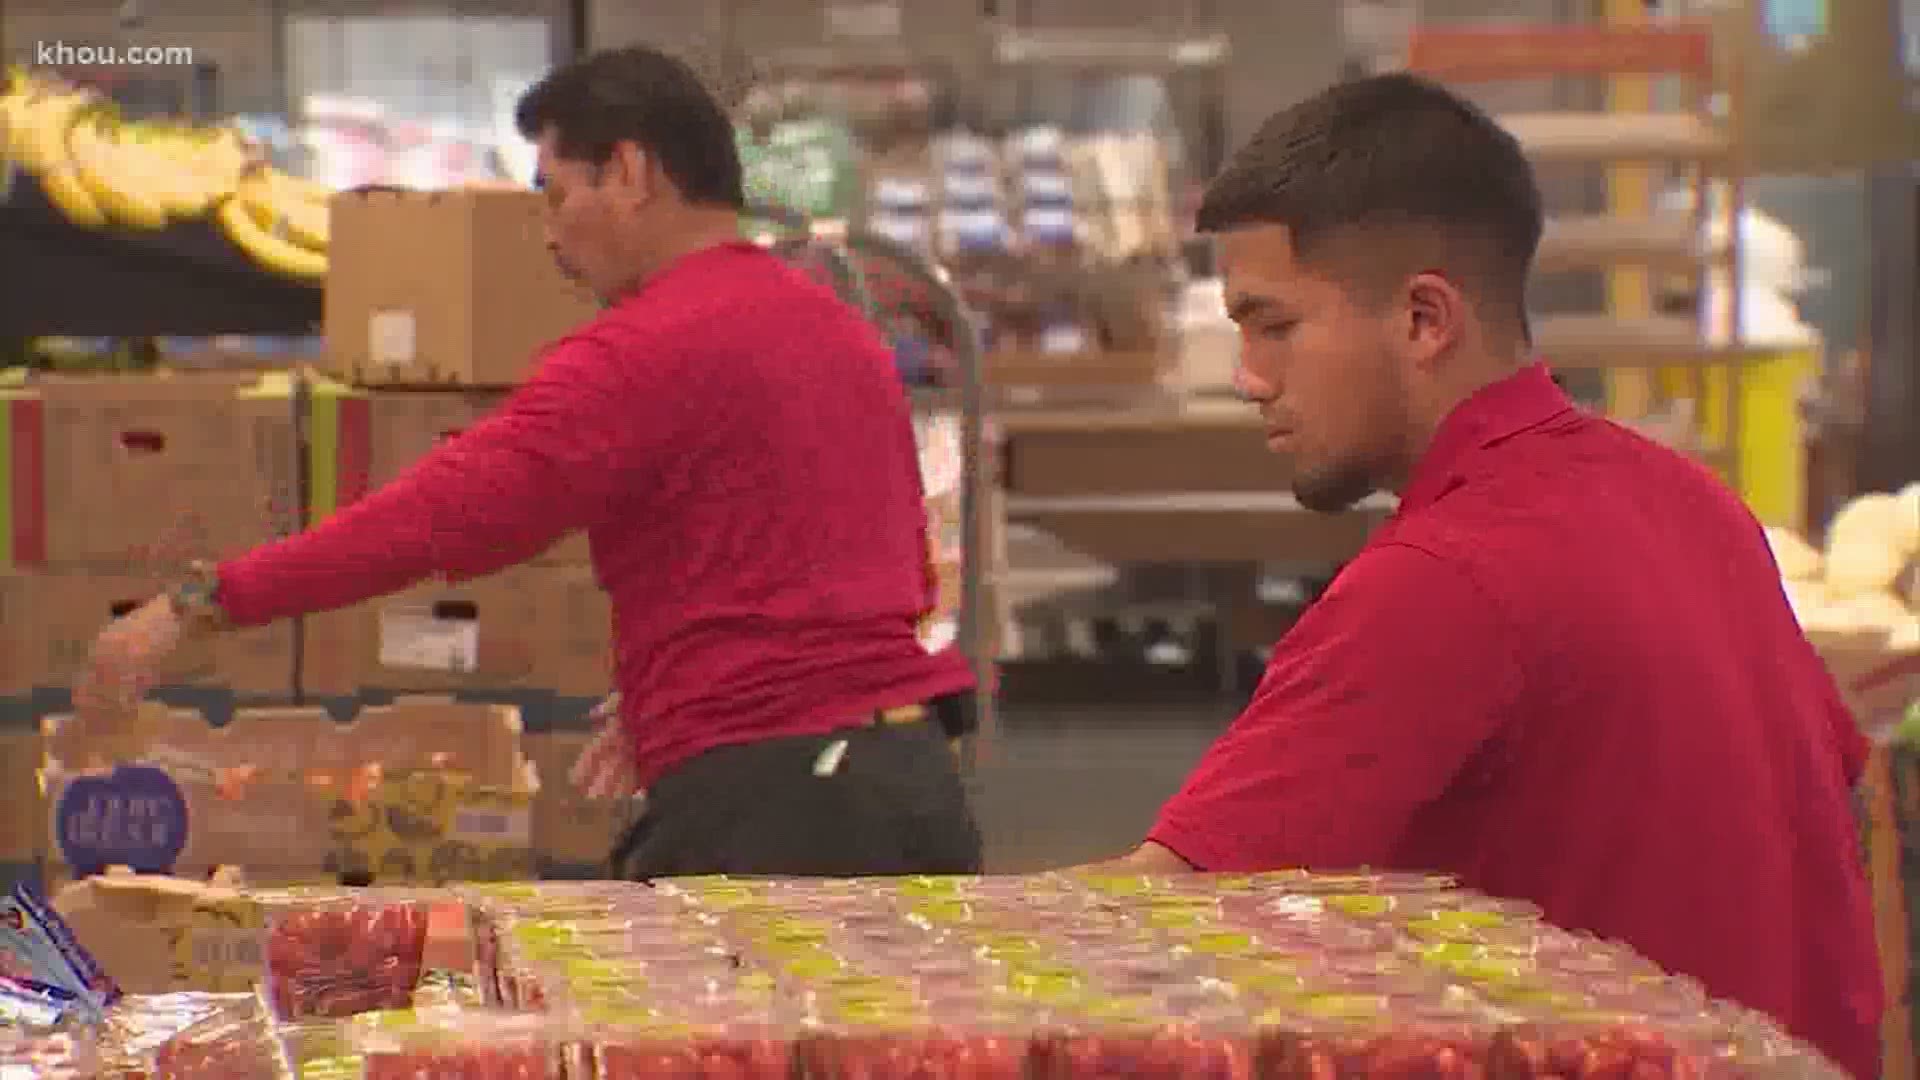 H-E-B said it's ending the temporary Texas Proud Pay program and replacing it with "accelerated and enhanced pay increases" for hourly store and supply chain workers